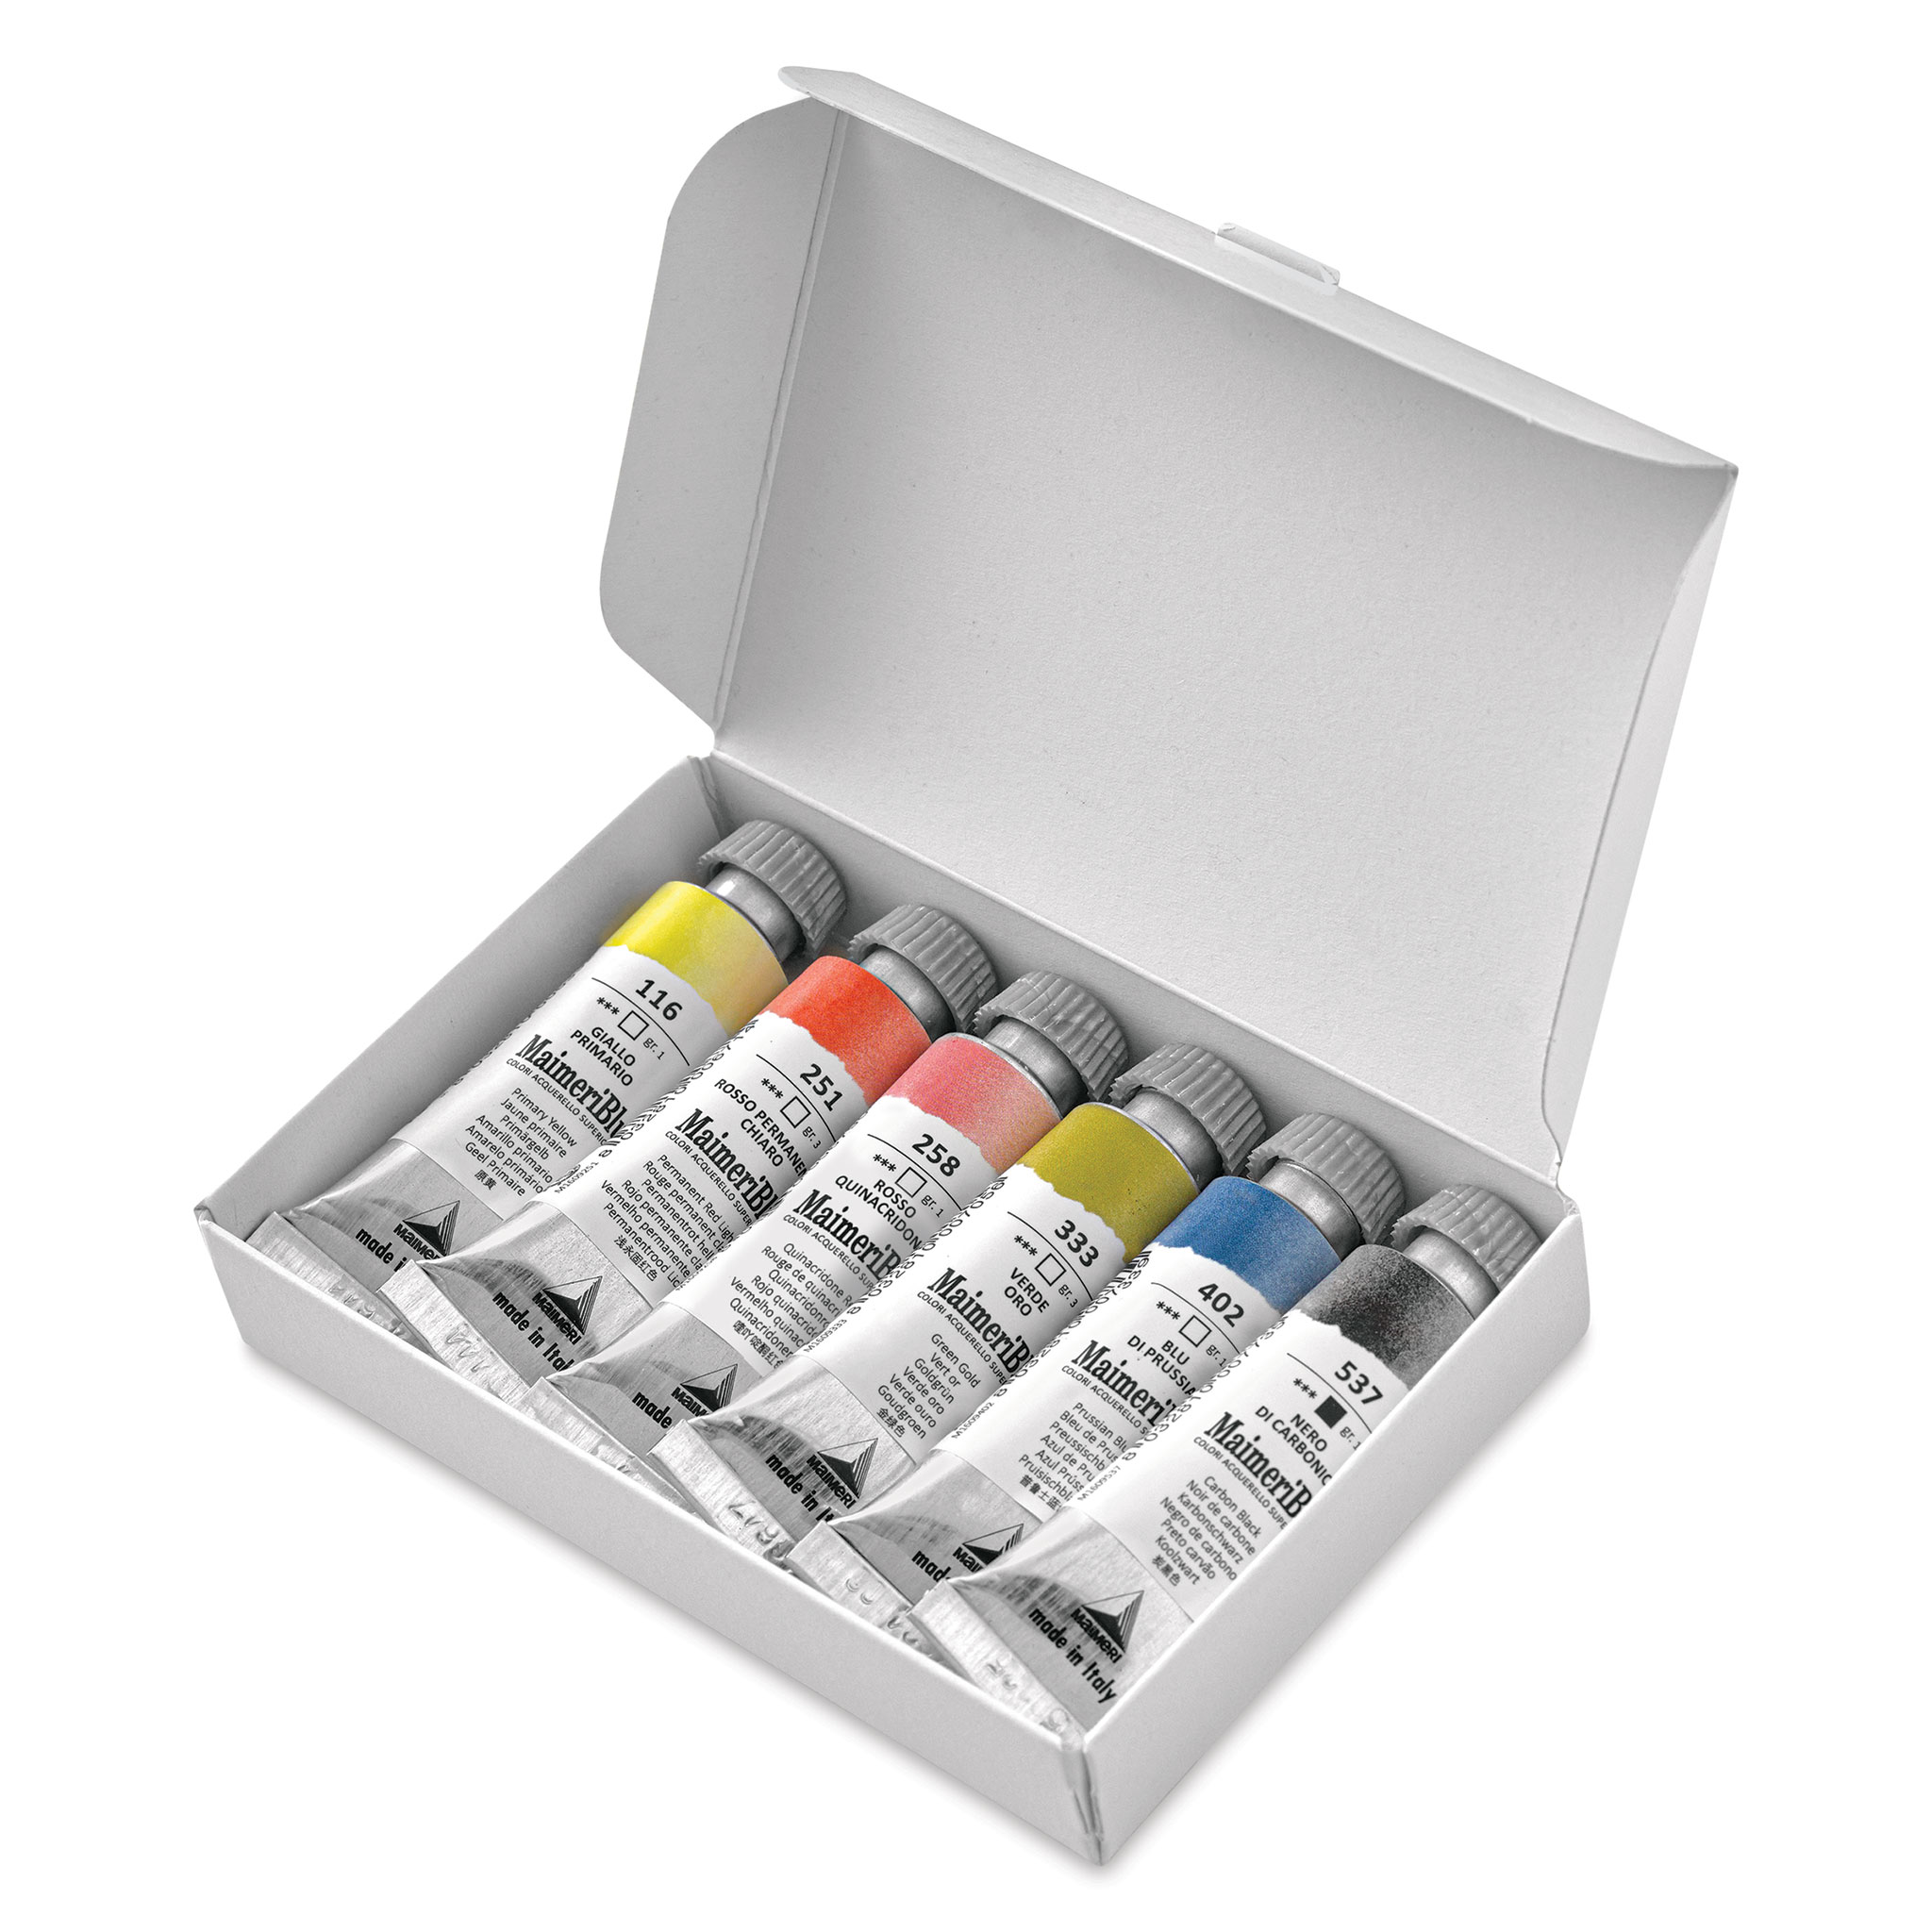 MaimeriBlu and Princeton Artist Brush, Jenna Rainey Artist Set, Watercolor  Paint, 12ml, 6 Tubes – Includes Velvetouch Blooms Brush – Professional  Watercolor - The Art Store/Commercial Art Supply